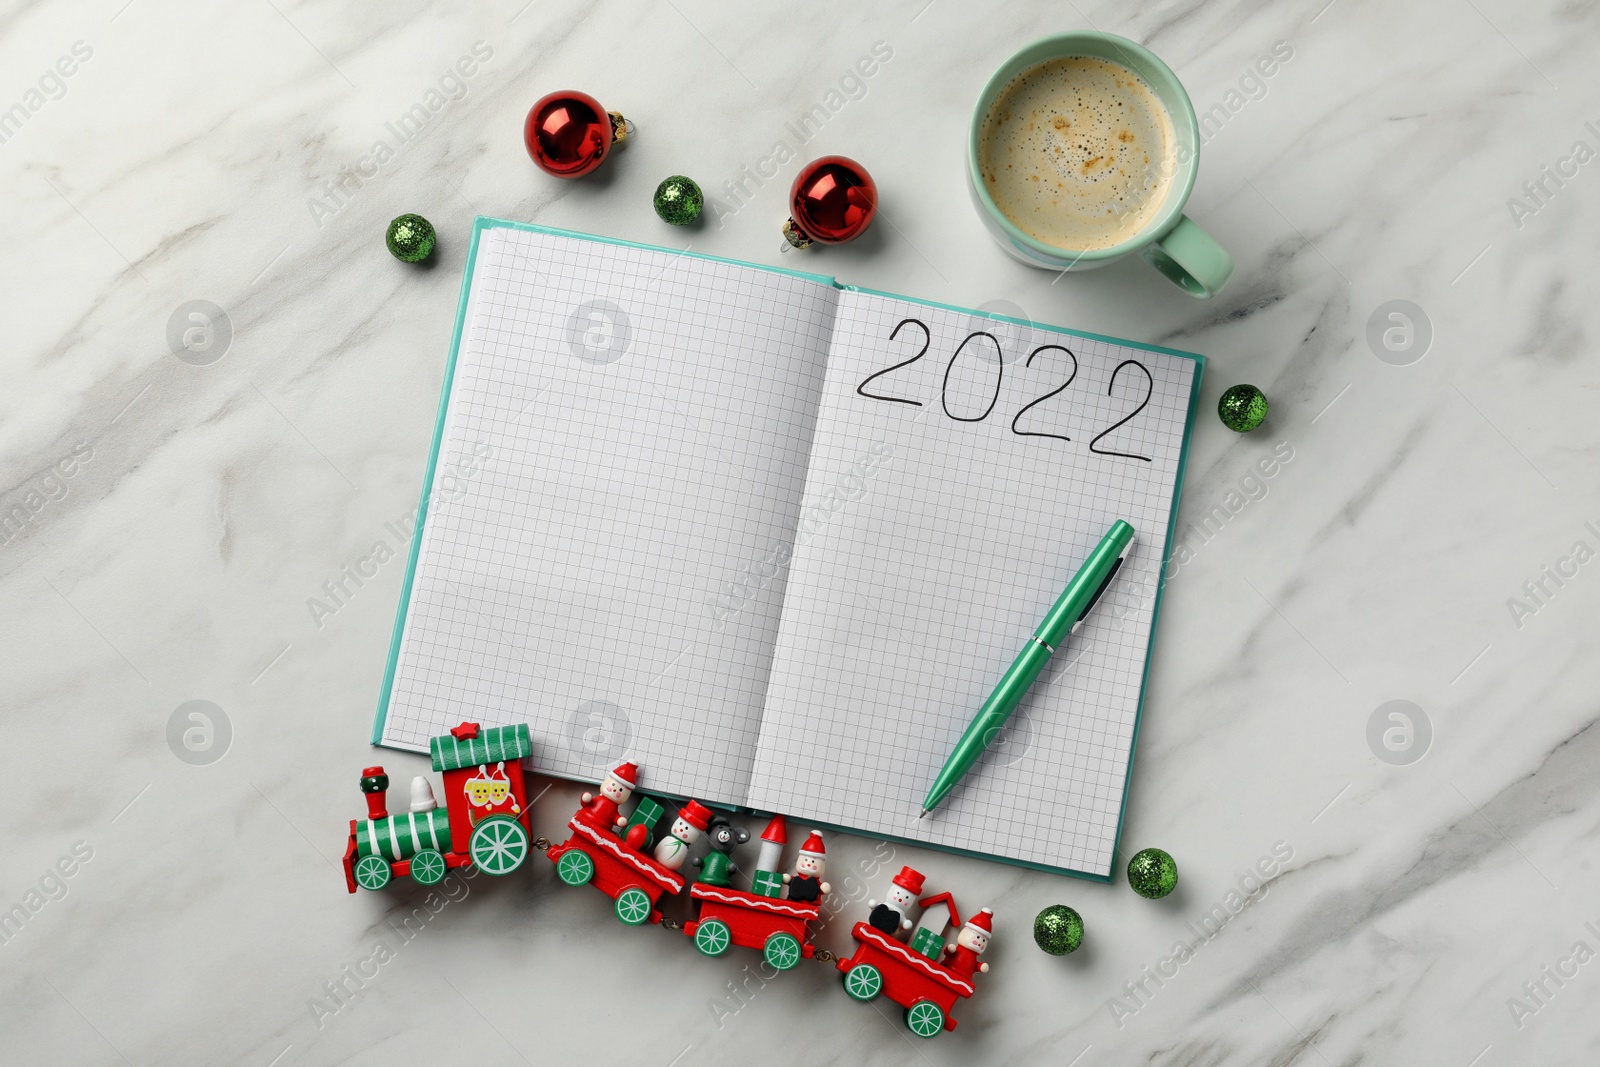 Photo of Open planner, cup of coffee and Christmas decor on white marble background, flat lay. 2022 New Year aims